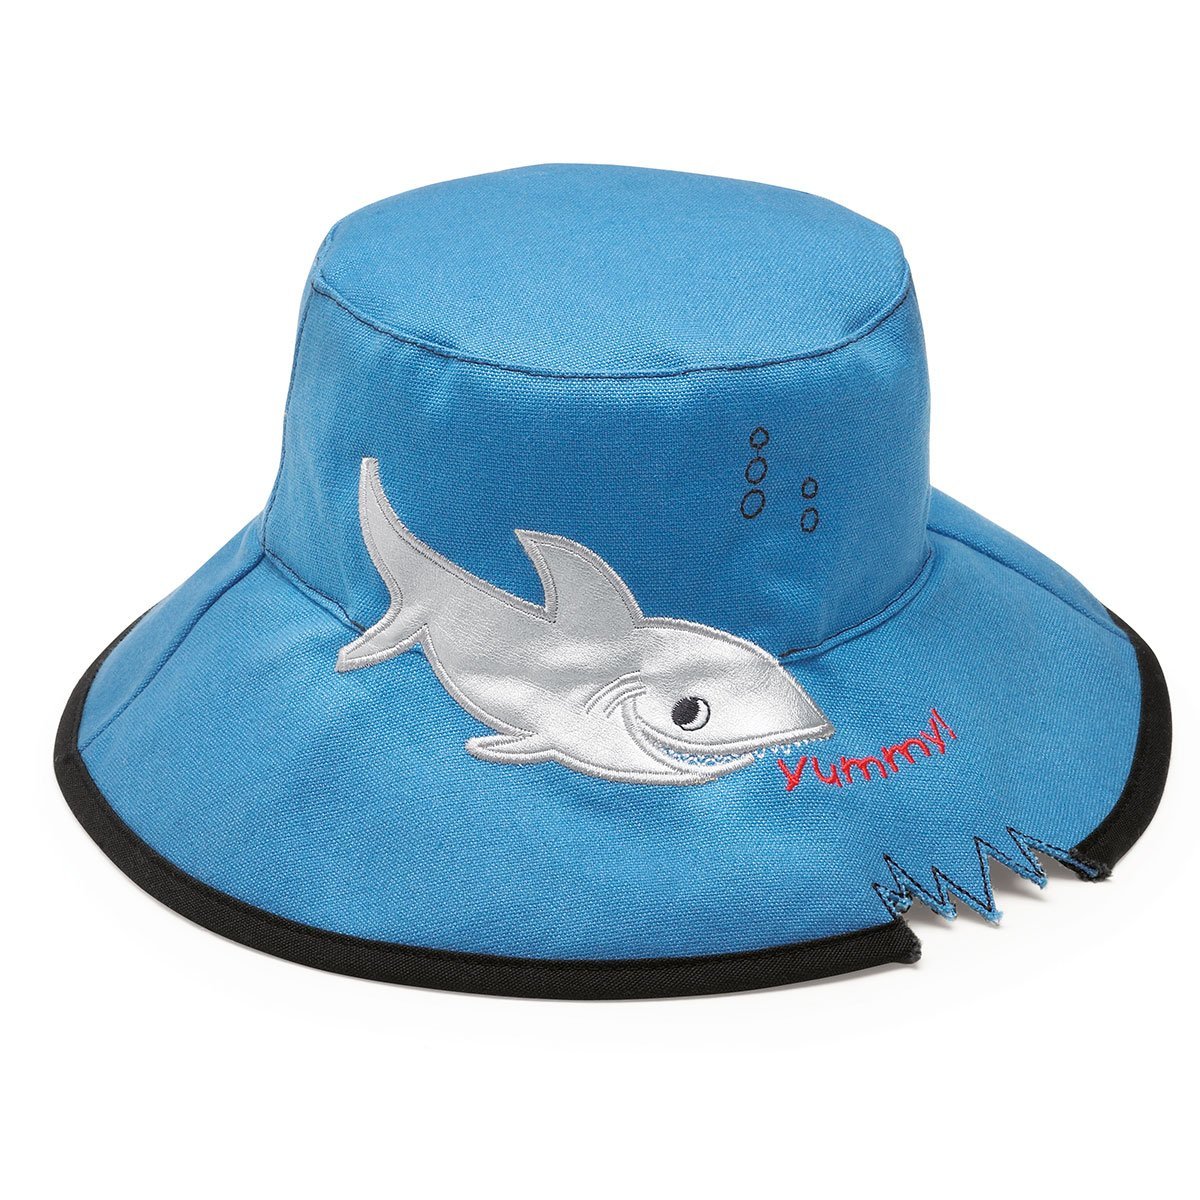 Featuring Kid's Packable Bucket Style UPF Shark Hat Sun with Chinstrap in Blue from Wallaroo